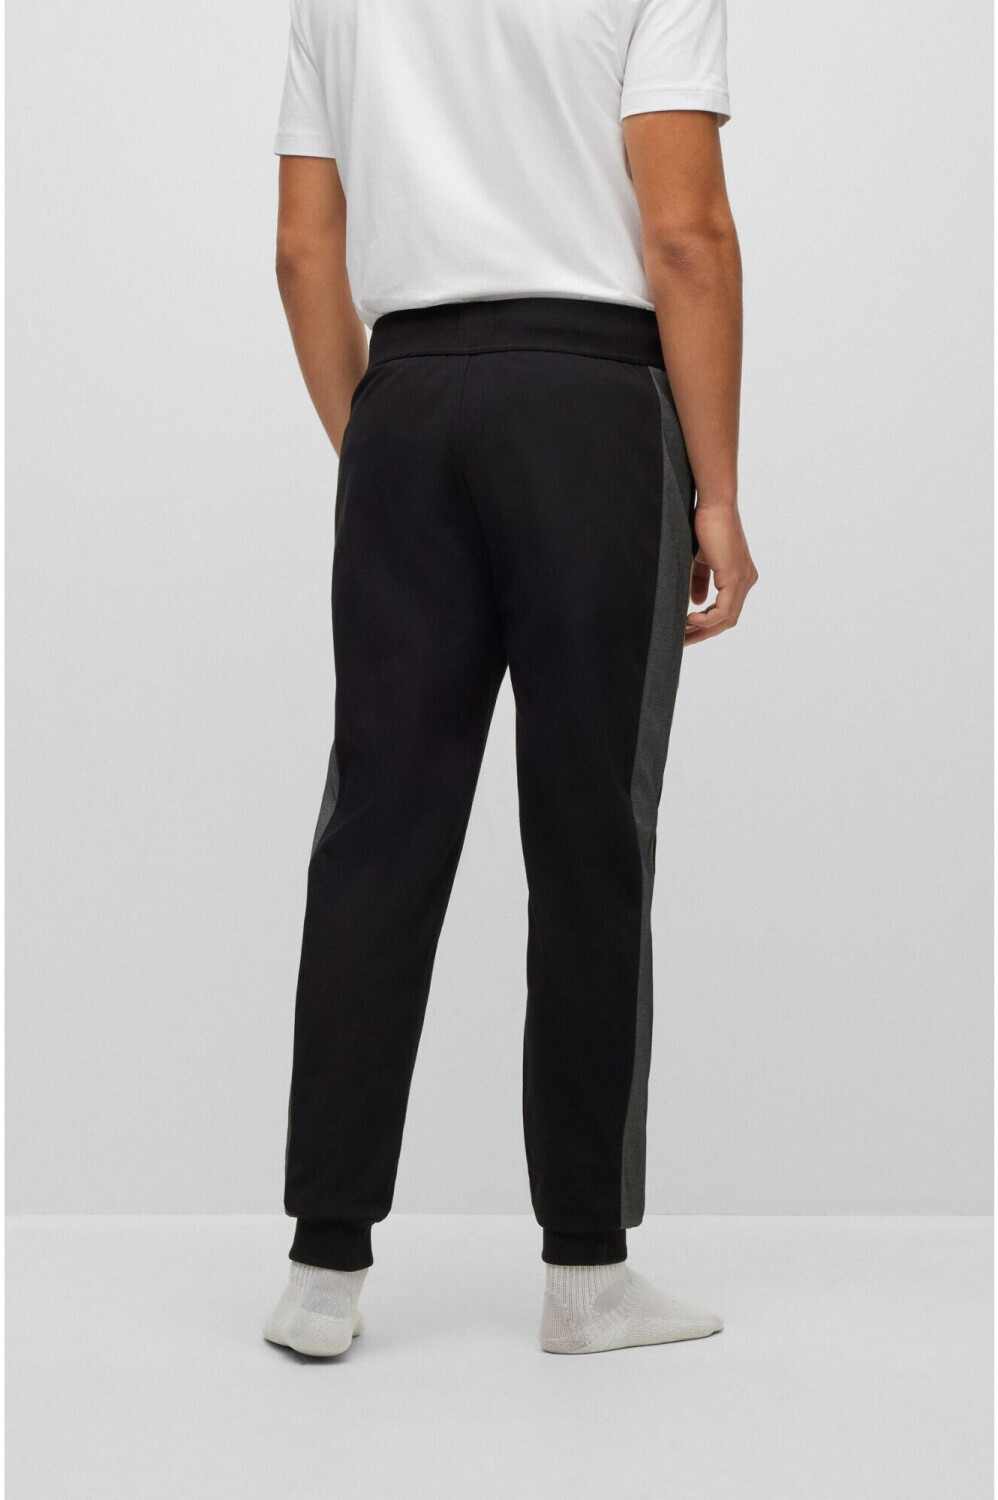 Buy Hugo Boss Tracksuit Pants (50491283) black from £69.00 (Today